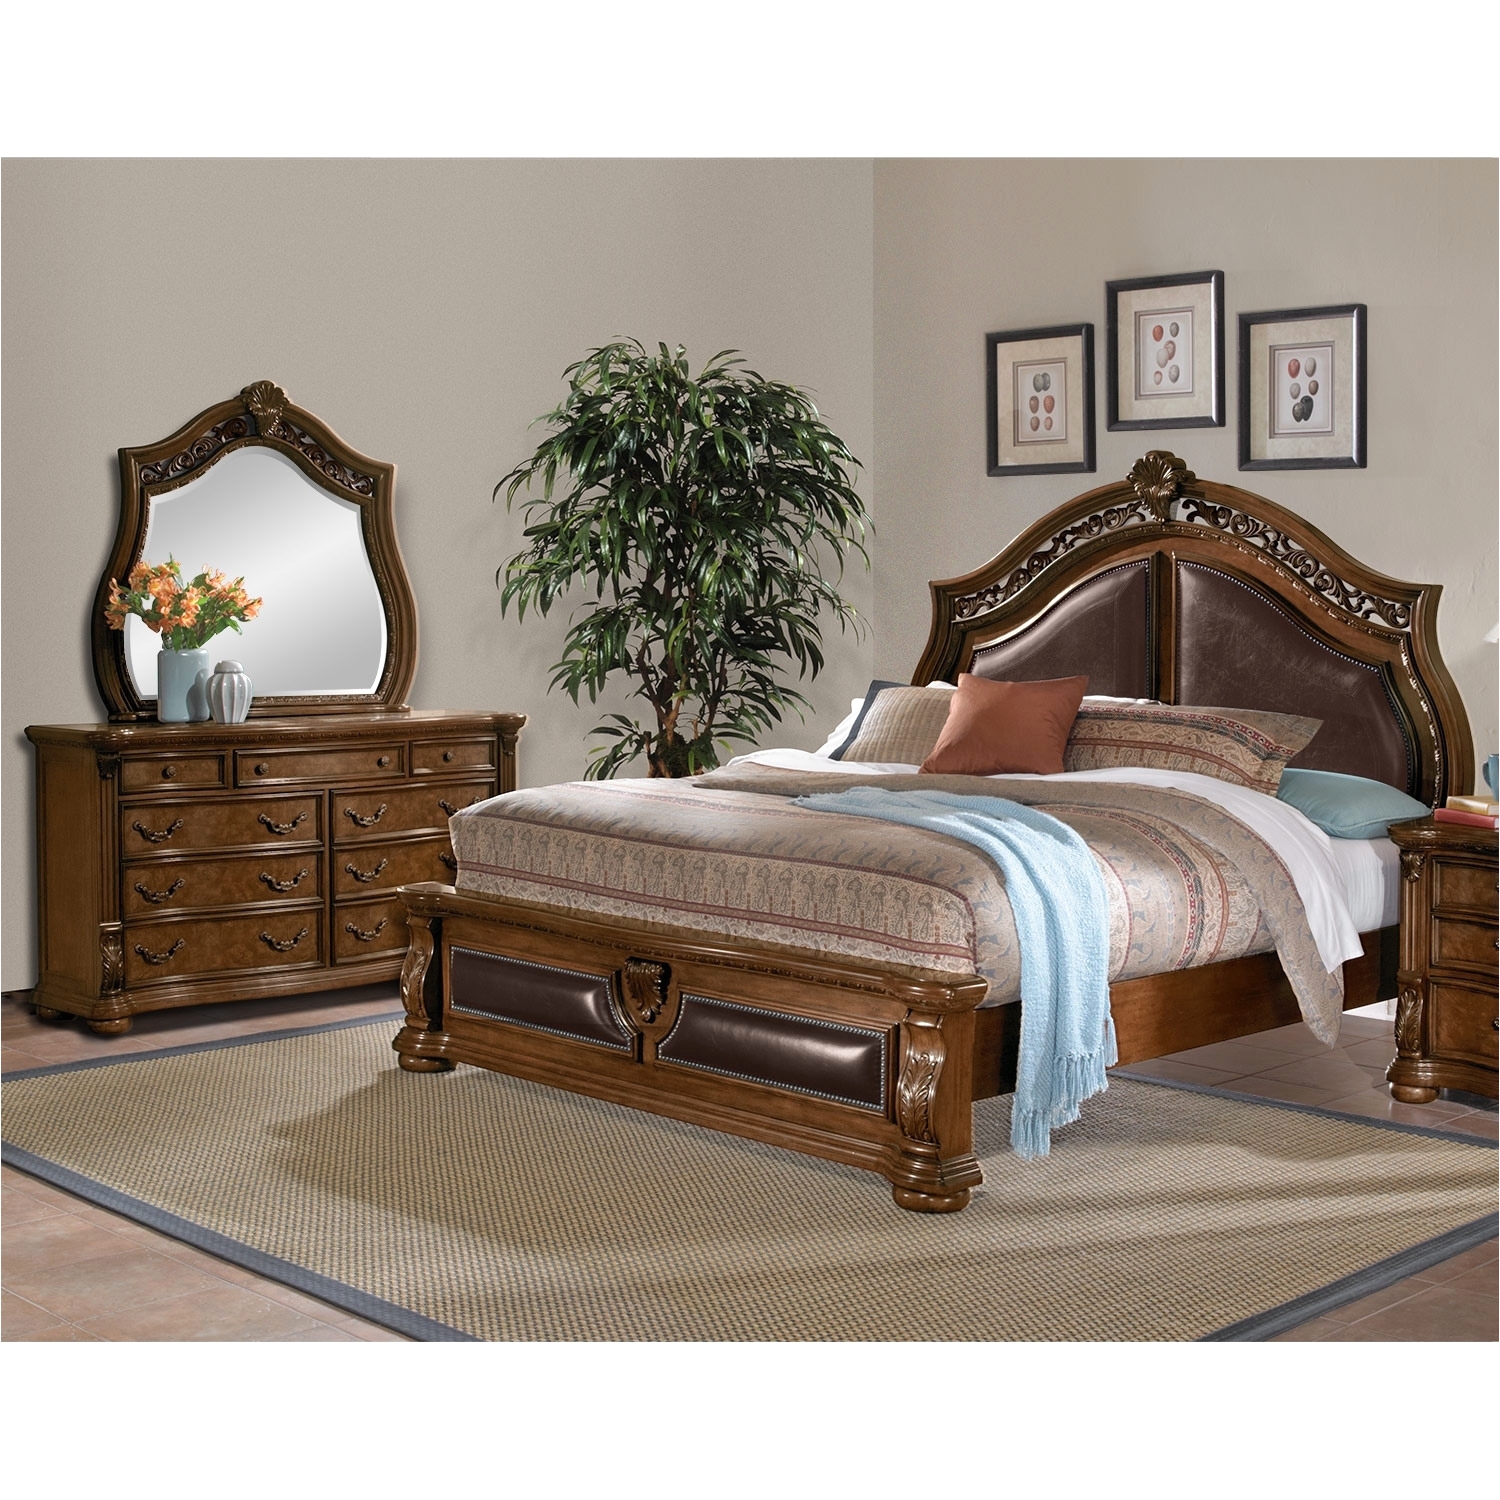 value city furniture bedroom awesome value city furniture bedroom set unique amazing value city bedroom